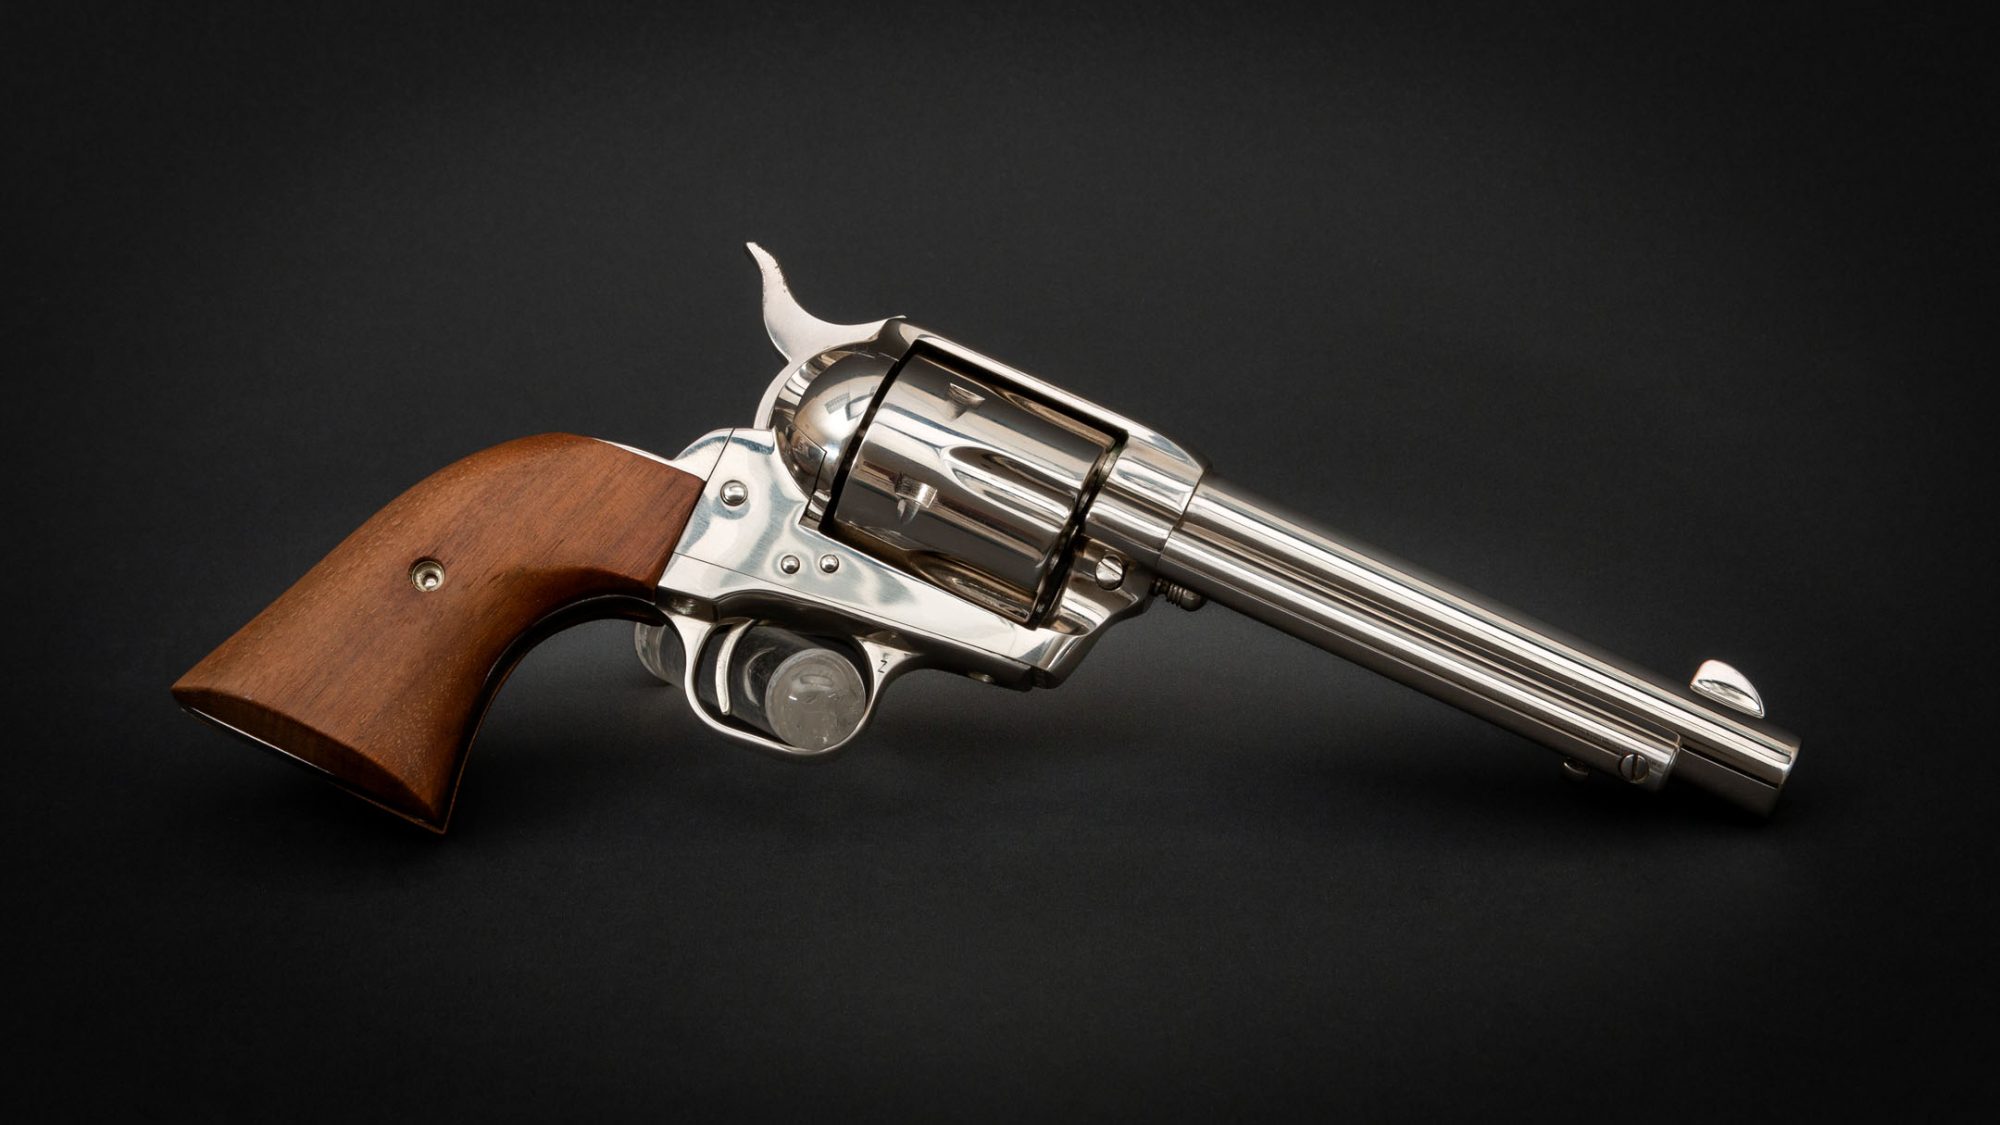 Nickel plated Colt SAA revolver in .357 Magnum, for sale by Turnbull Restoration Co. of Bloomfield, NY